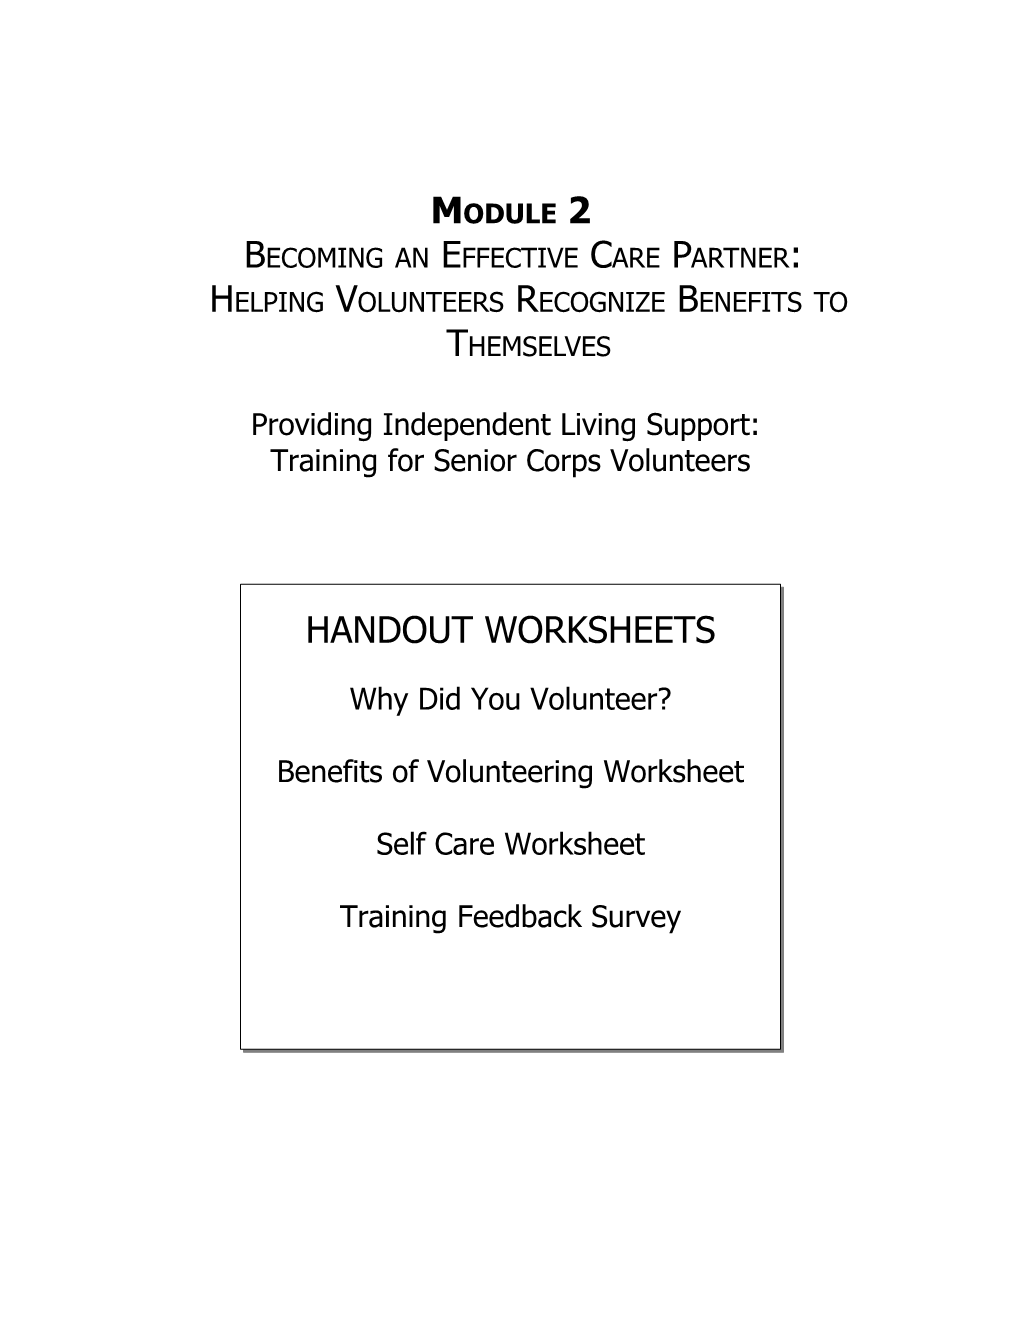 Module 2Becoming an Effective Care Partner: Helping Volunteers Recognize Benefits to Themselves